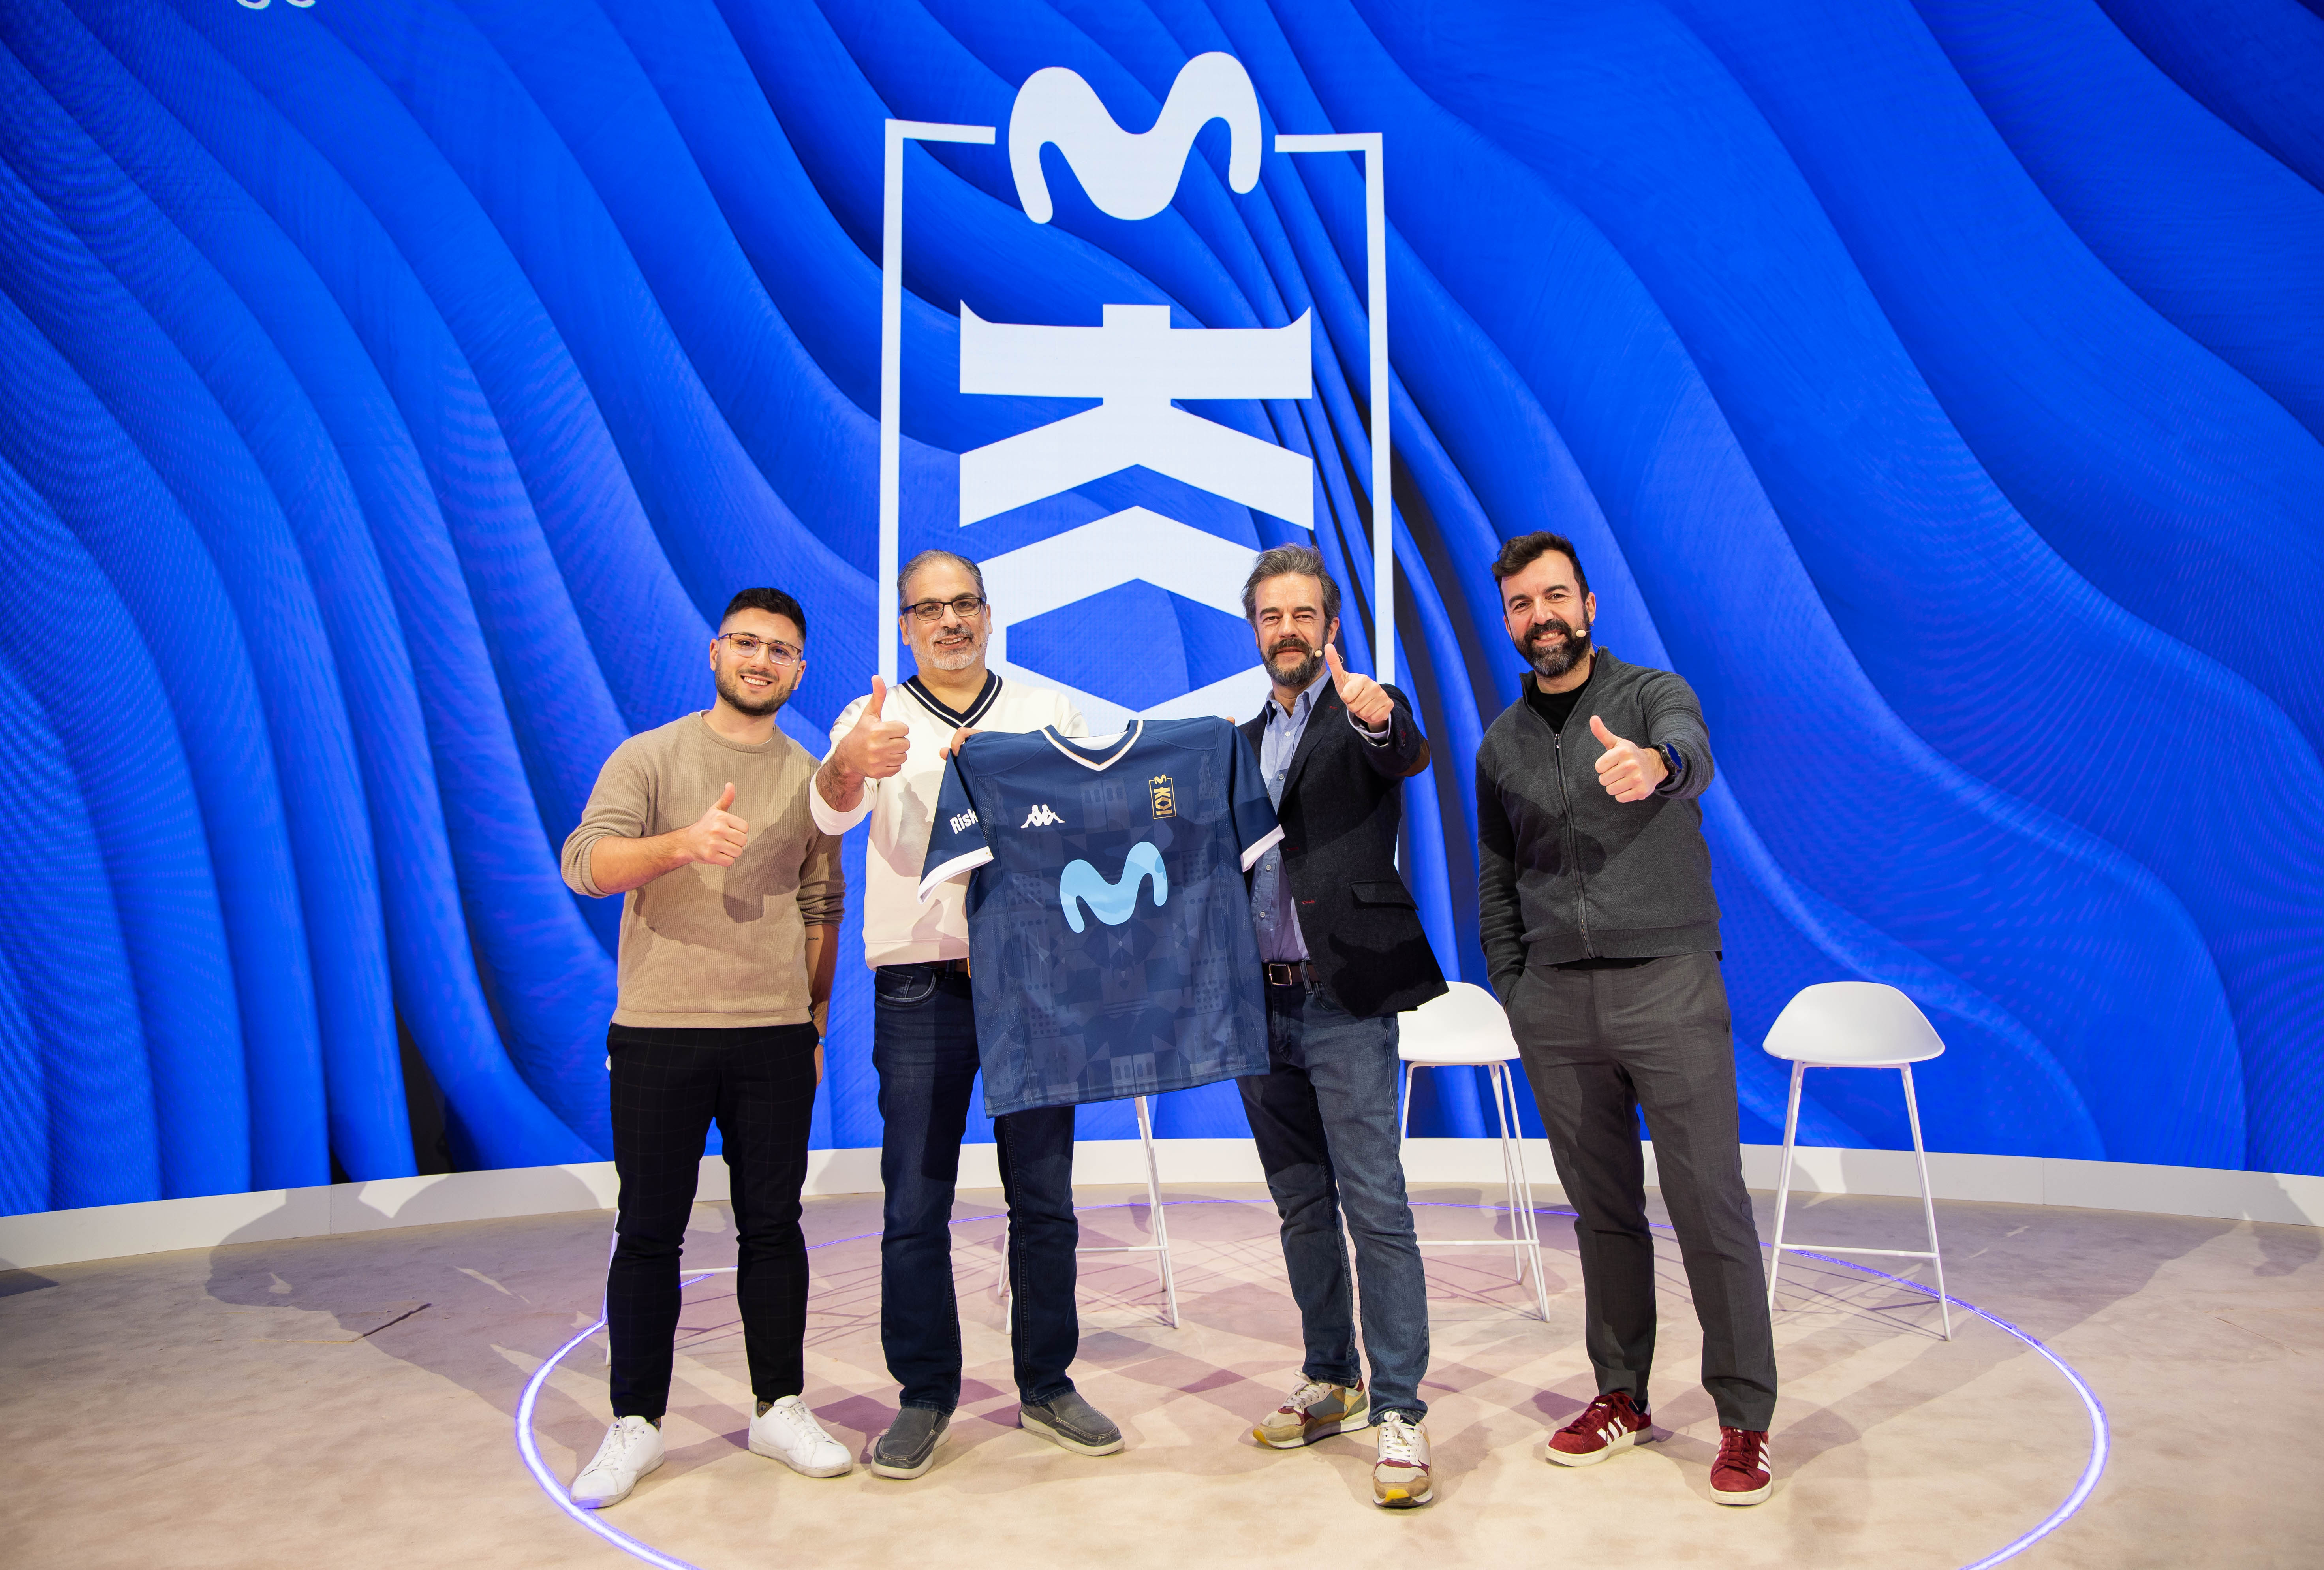 From left to right: Luis Filgueira, Sports Manager of Movistar KOI; Adam Adamou, Co-founder and CEO of OverActive Media; Aitor Goyenechea, Director of  Advertising, Brand and Sponsorship of Movistar, and Fernando Piquer, Chief Strategy Officer of OverActive Media.